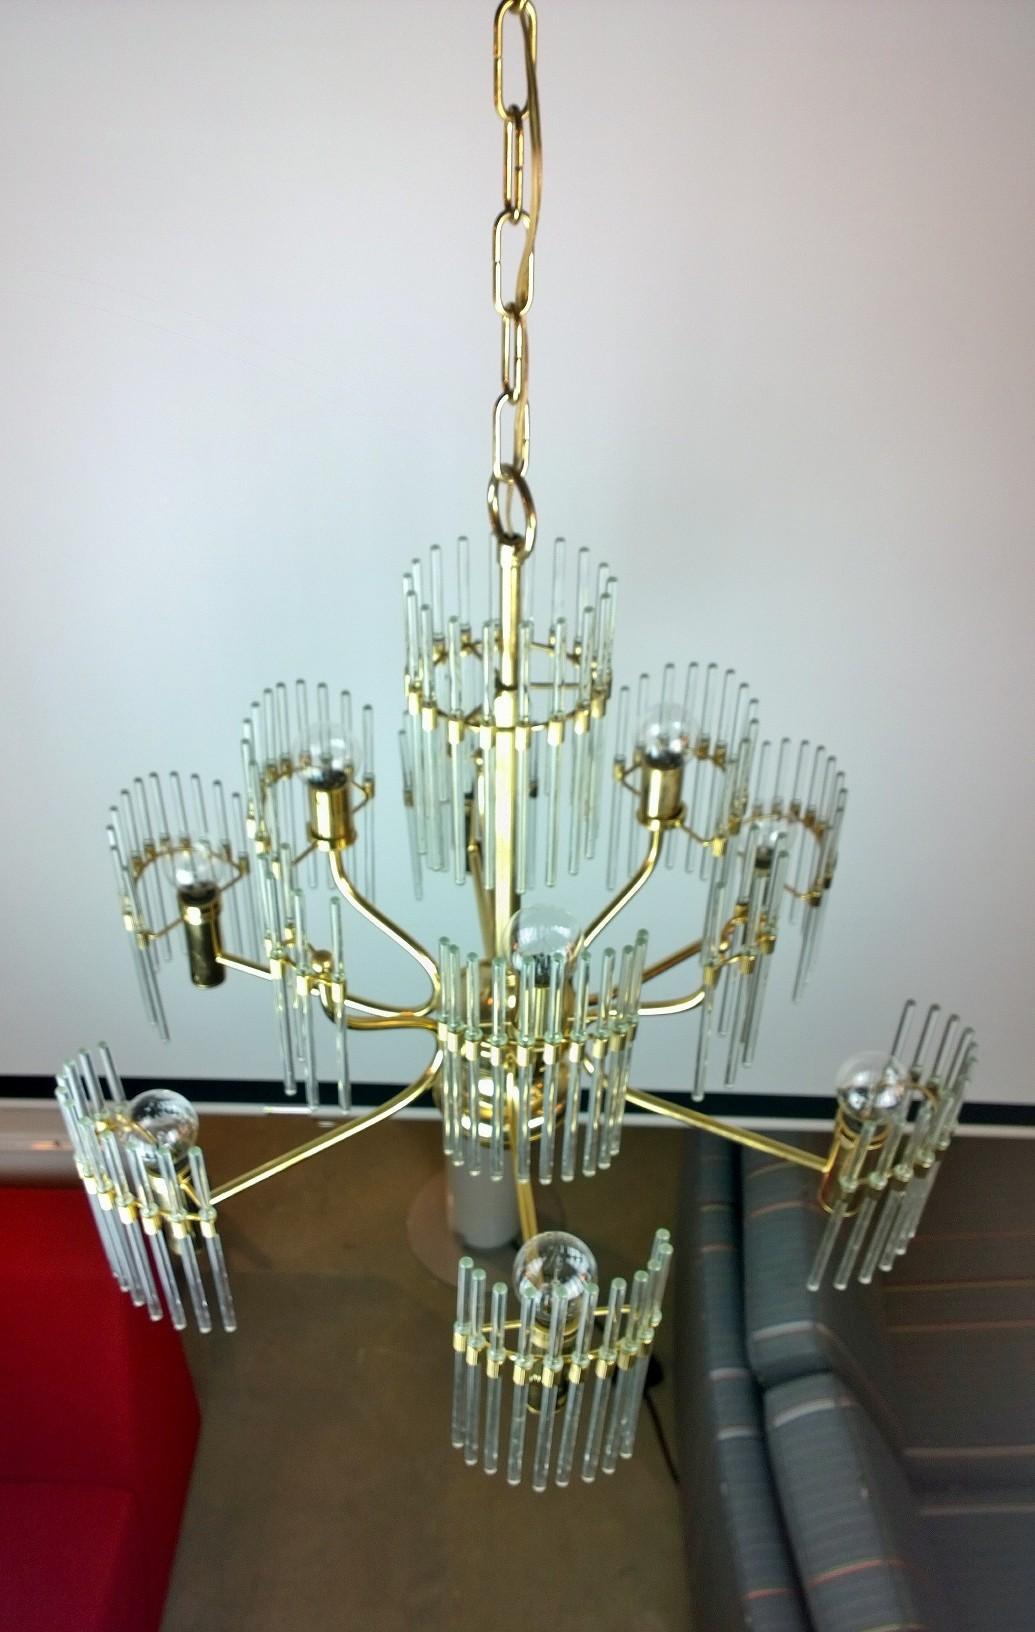 Offered is a Mid-Century Modern Italian Gaetano Sciolari brass frame and crystal rod chandelier. Sciolari lived and designed chandeliers in Italy. His pieces combined minimalism with high-glamour. His designs are comprised of shapes arranged in a